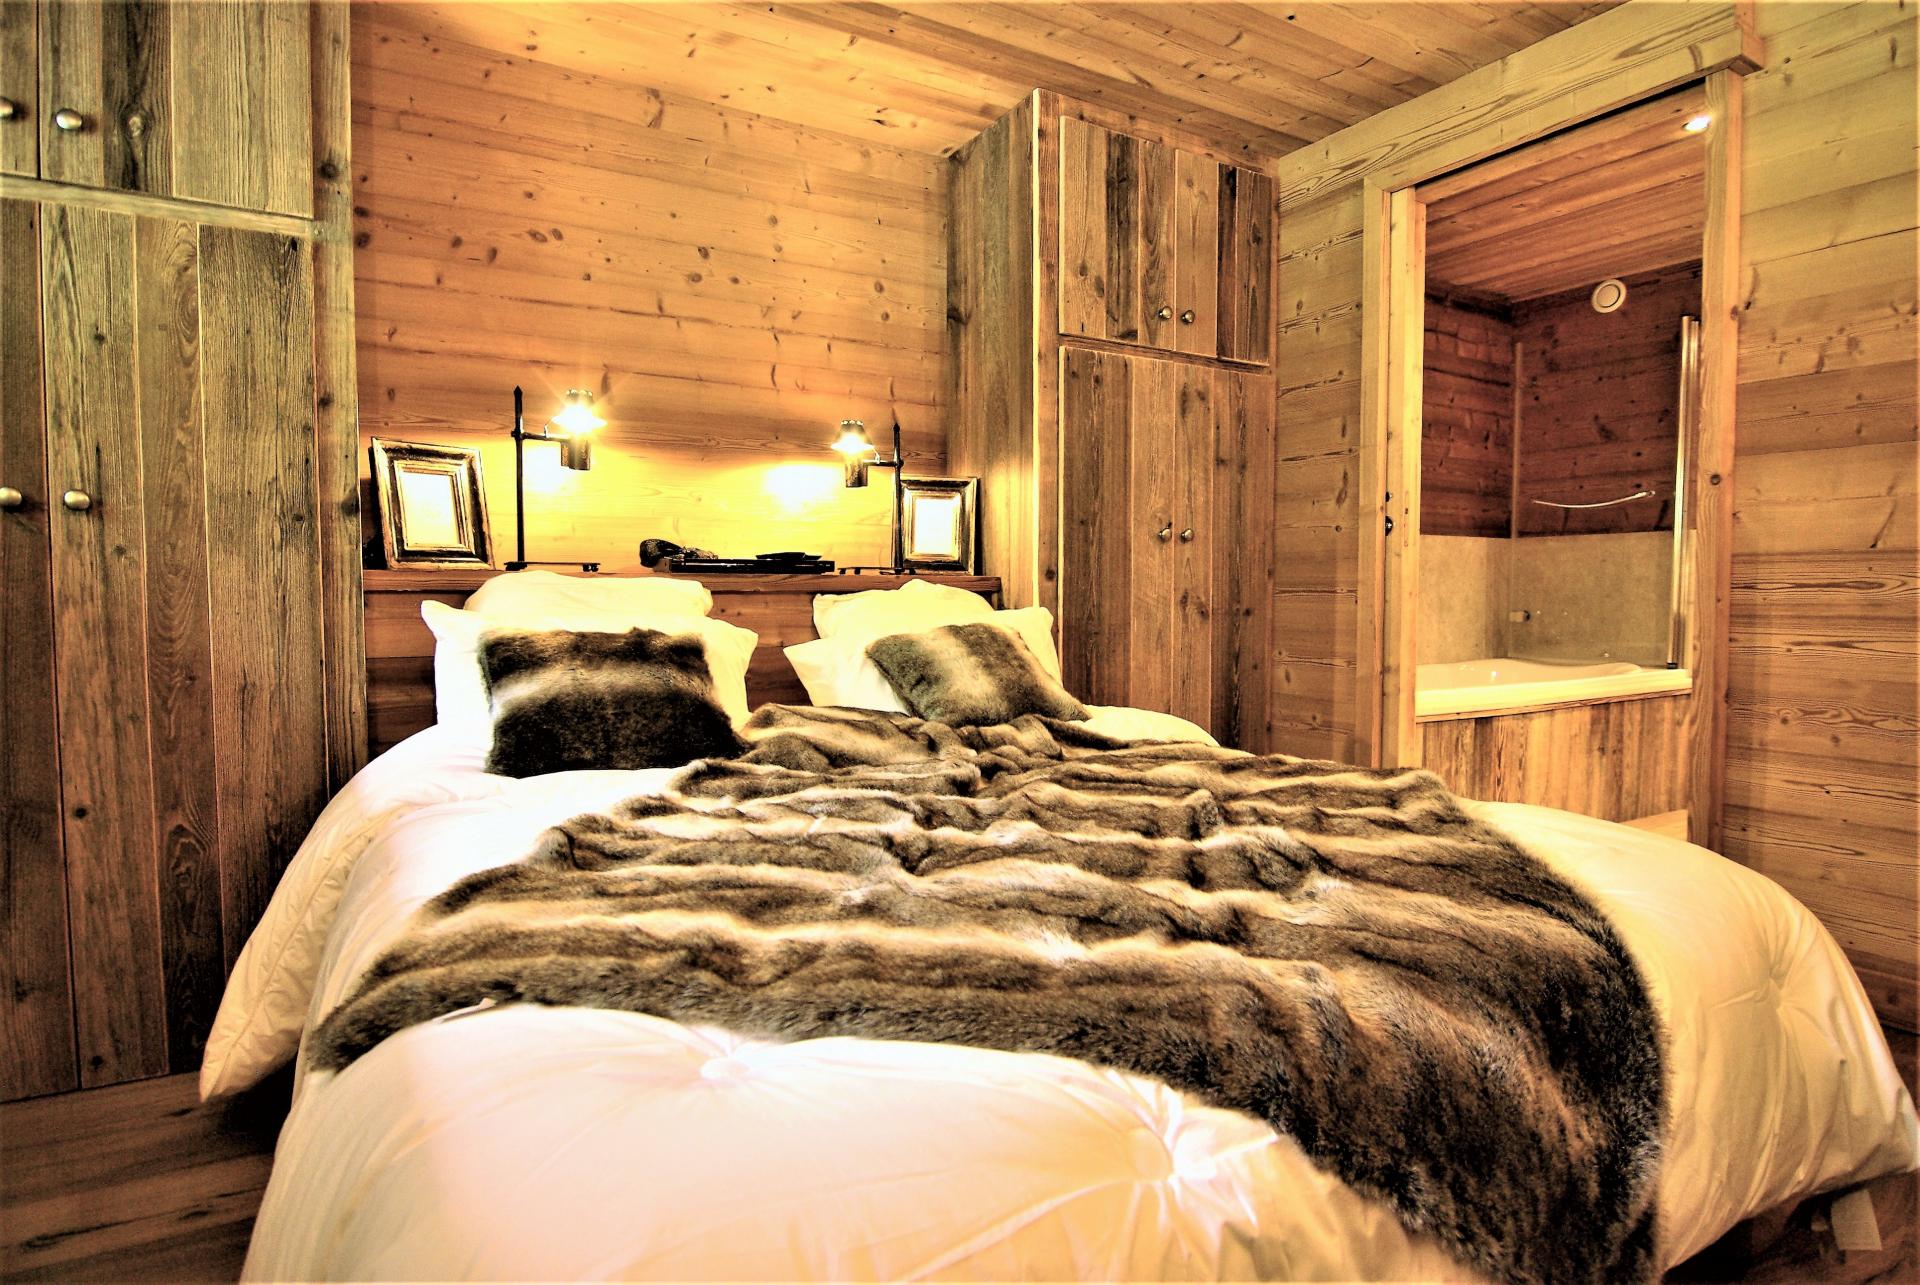 AN ENSUITE BEDROOM IN A HOLIDAY CHALET IN THE ALPS